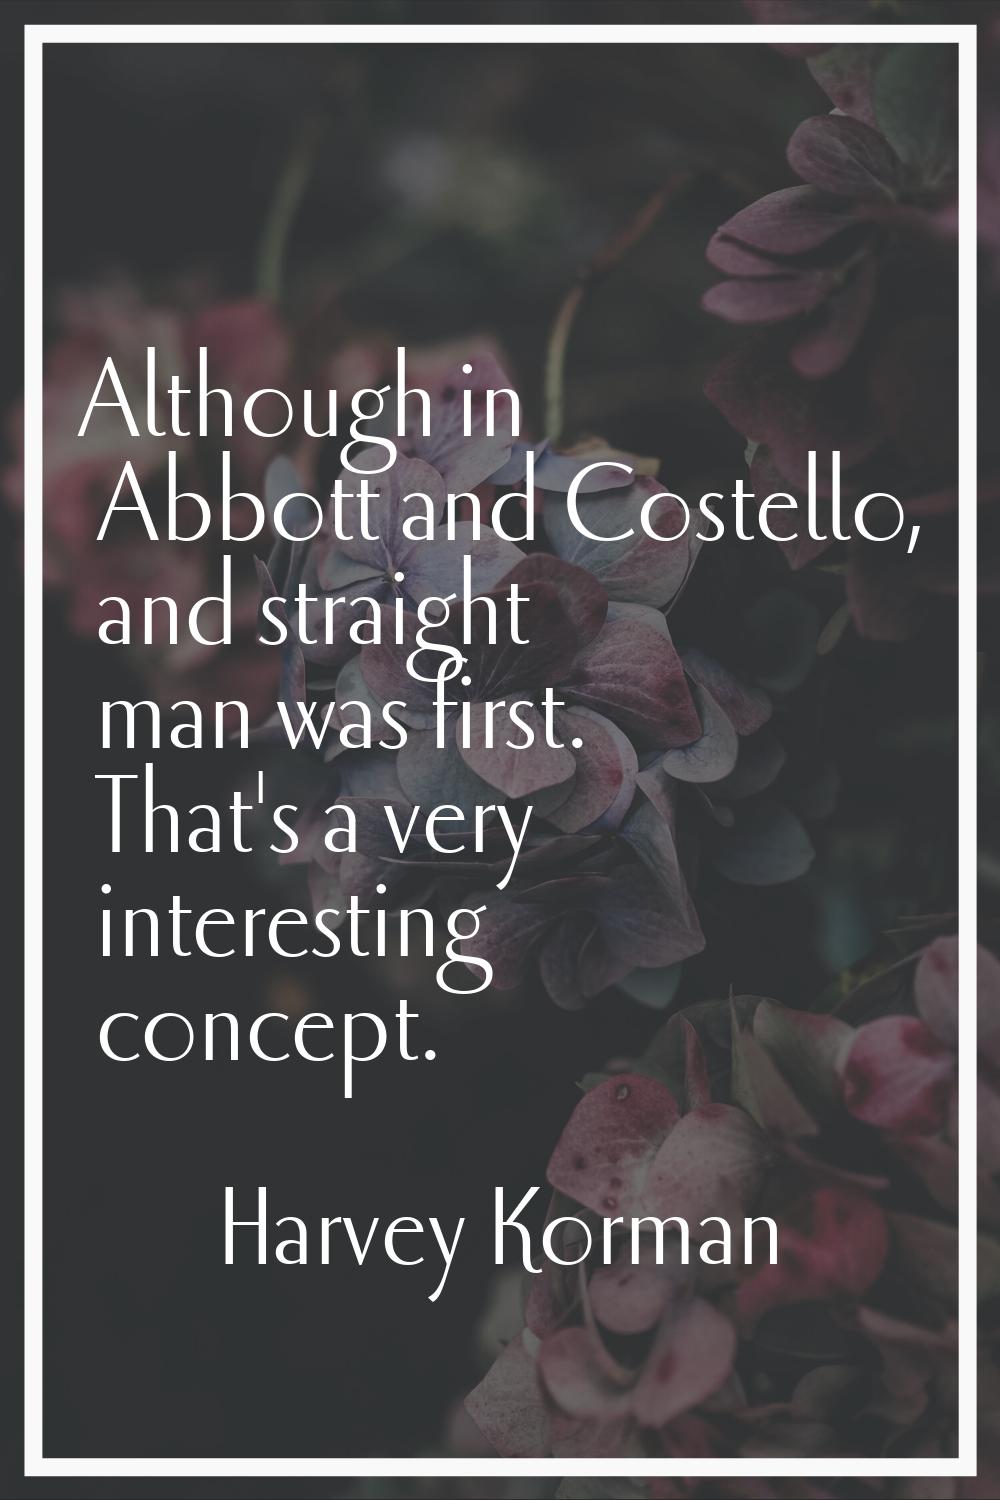 Although in Abbott and Costello, and straight man was first. That's a very interesting concept.